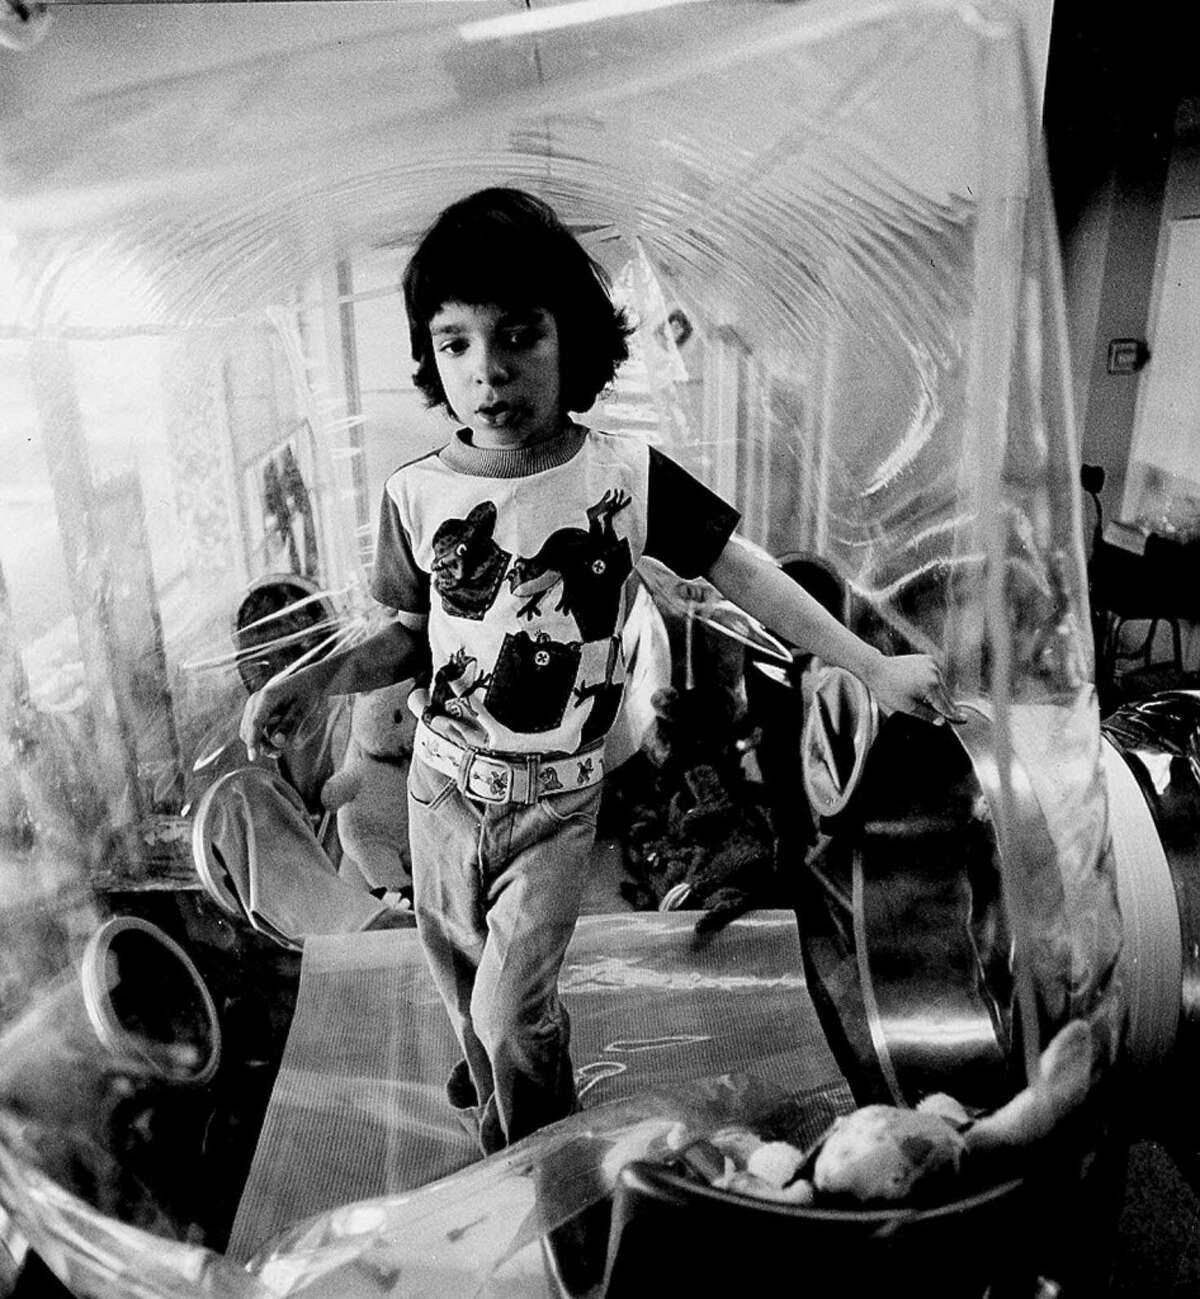 The saga of David Vetter, Houston's "Bubble Boy," paved the way for others.